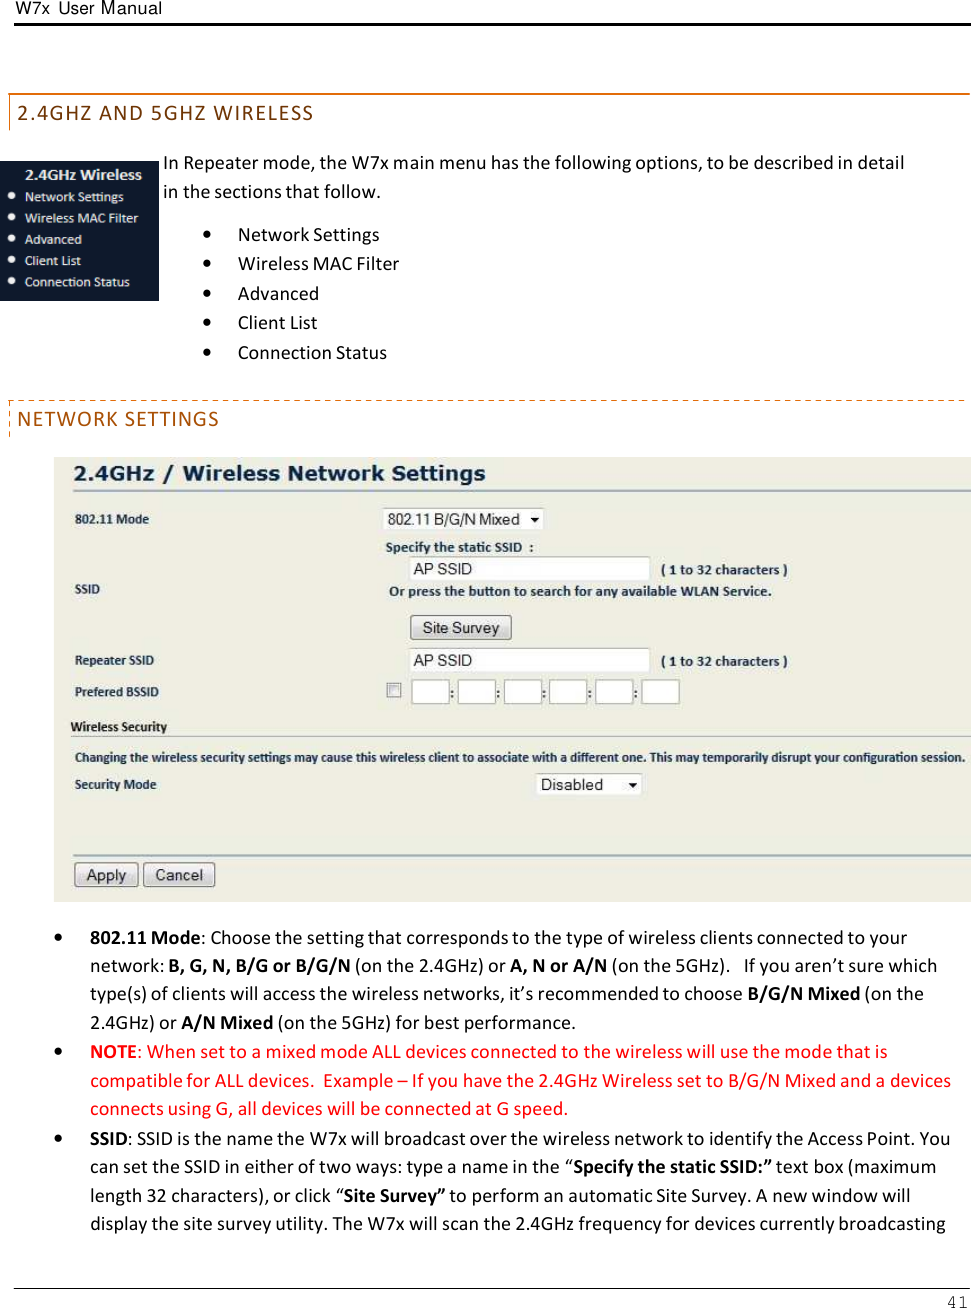 W7x  User Manual 41       2 . 4 G H Z  A N D  5 G H Z  W I R E L E S S  In Repeater mode, the W7x main menu has the following options, to be described in detail in the sections that follow.  •   Network Settings •   Wireless MAC Filter •   Advanced •   Client List •   Connection Status   NETWORK SETTINGS    •   802.11 Mode: Choose the setting that corresponds to the type of wireless clients connected to your network: B, G, N, B/G or B/G/N (on the 2.4GHz) or A, N or A/N (on the 5GHz).   If you aren’t sure which type(s) of clients will access the wireless networks, it’s recommended to choose B/G/N Mixed (on the 2.4GHz) or A/N Mixed (on the 5GHz) for best performance. •   NOTE: When set to a mixed mode ALL devices connected to the wireless will use the mode that is compatible for ALL devices.  Example – If you have the 2.4GHz Wireless set to B/G/N Mixed and a devices connects using G, all devices will be connected at G speed. •   SSID: SSID is the name the W7x will broadcast over the wireless network to identify the Access Point. You can set the SSID in either of two ways: type a name in the “Specify the static SSID:” text box (maximum length 32 characters), or click “Site Survey” to perform an automatic Site Survey. A new window will display the site survey utility. The W7x will scan the 2.4GHz frequency for devices currently broadcasting 